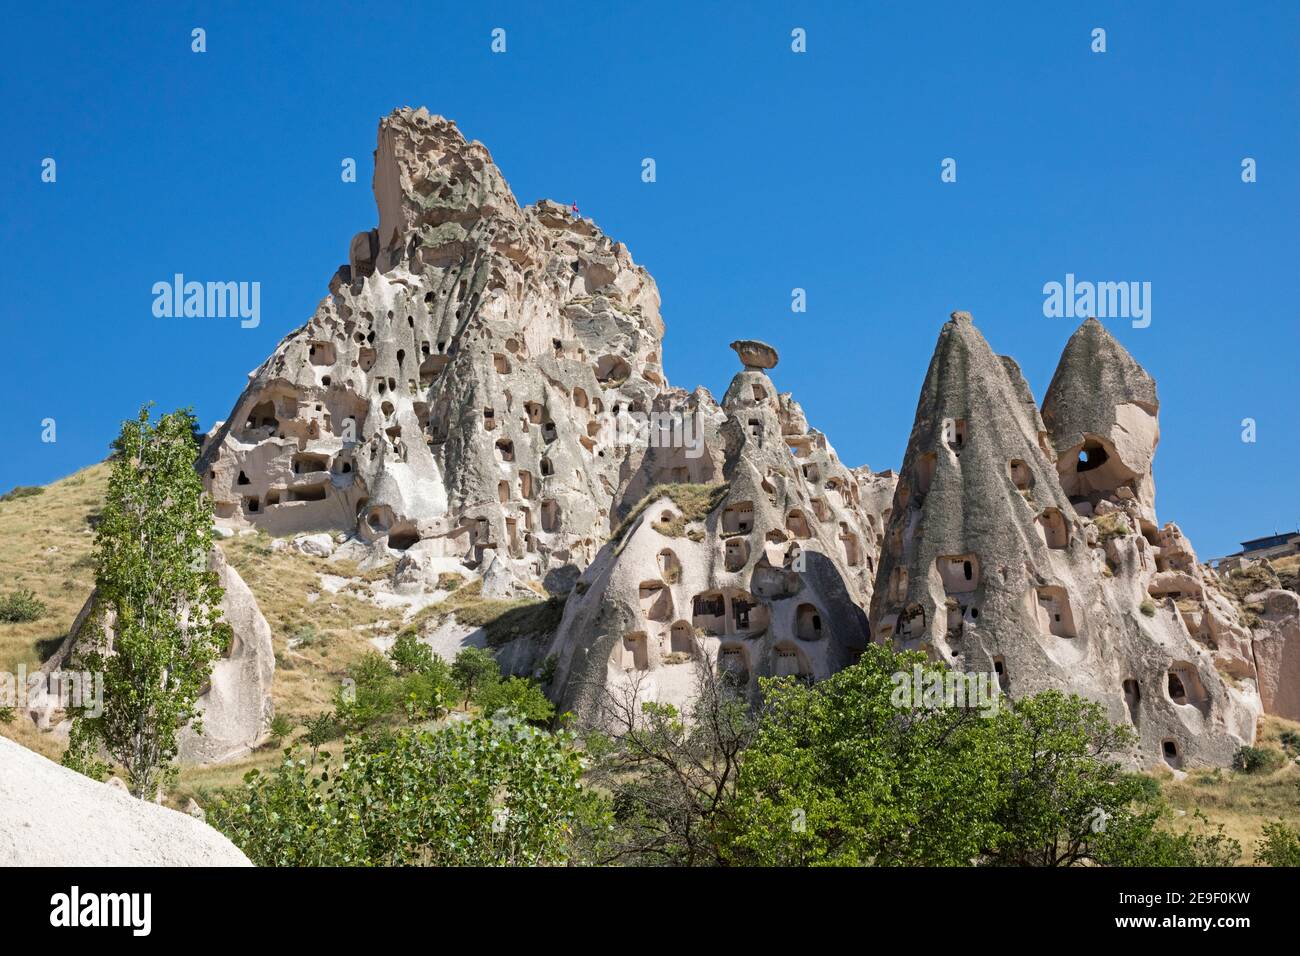 Fairy chimneys and homes / dwellings carved into the soft rock in Uçhisar, Cappadocia, Nevşehir Province in Central Anatolia, Turkey Stock Photo